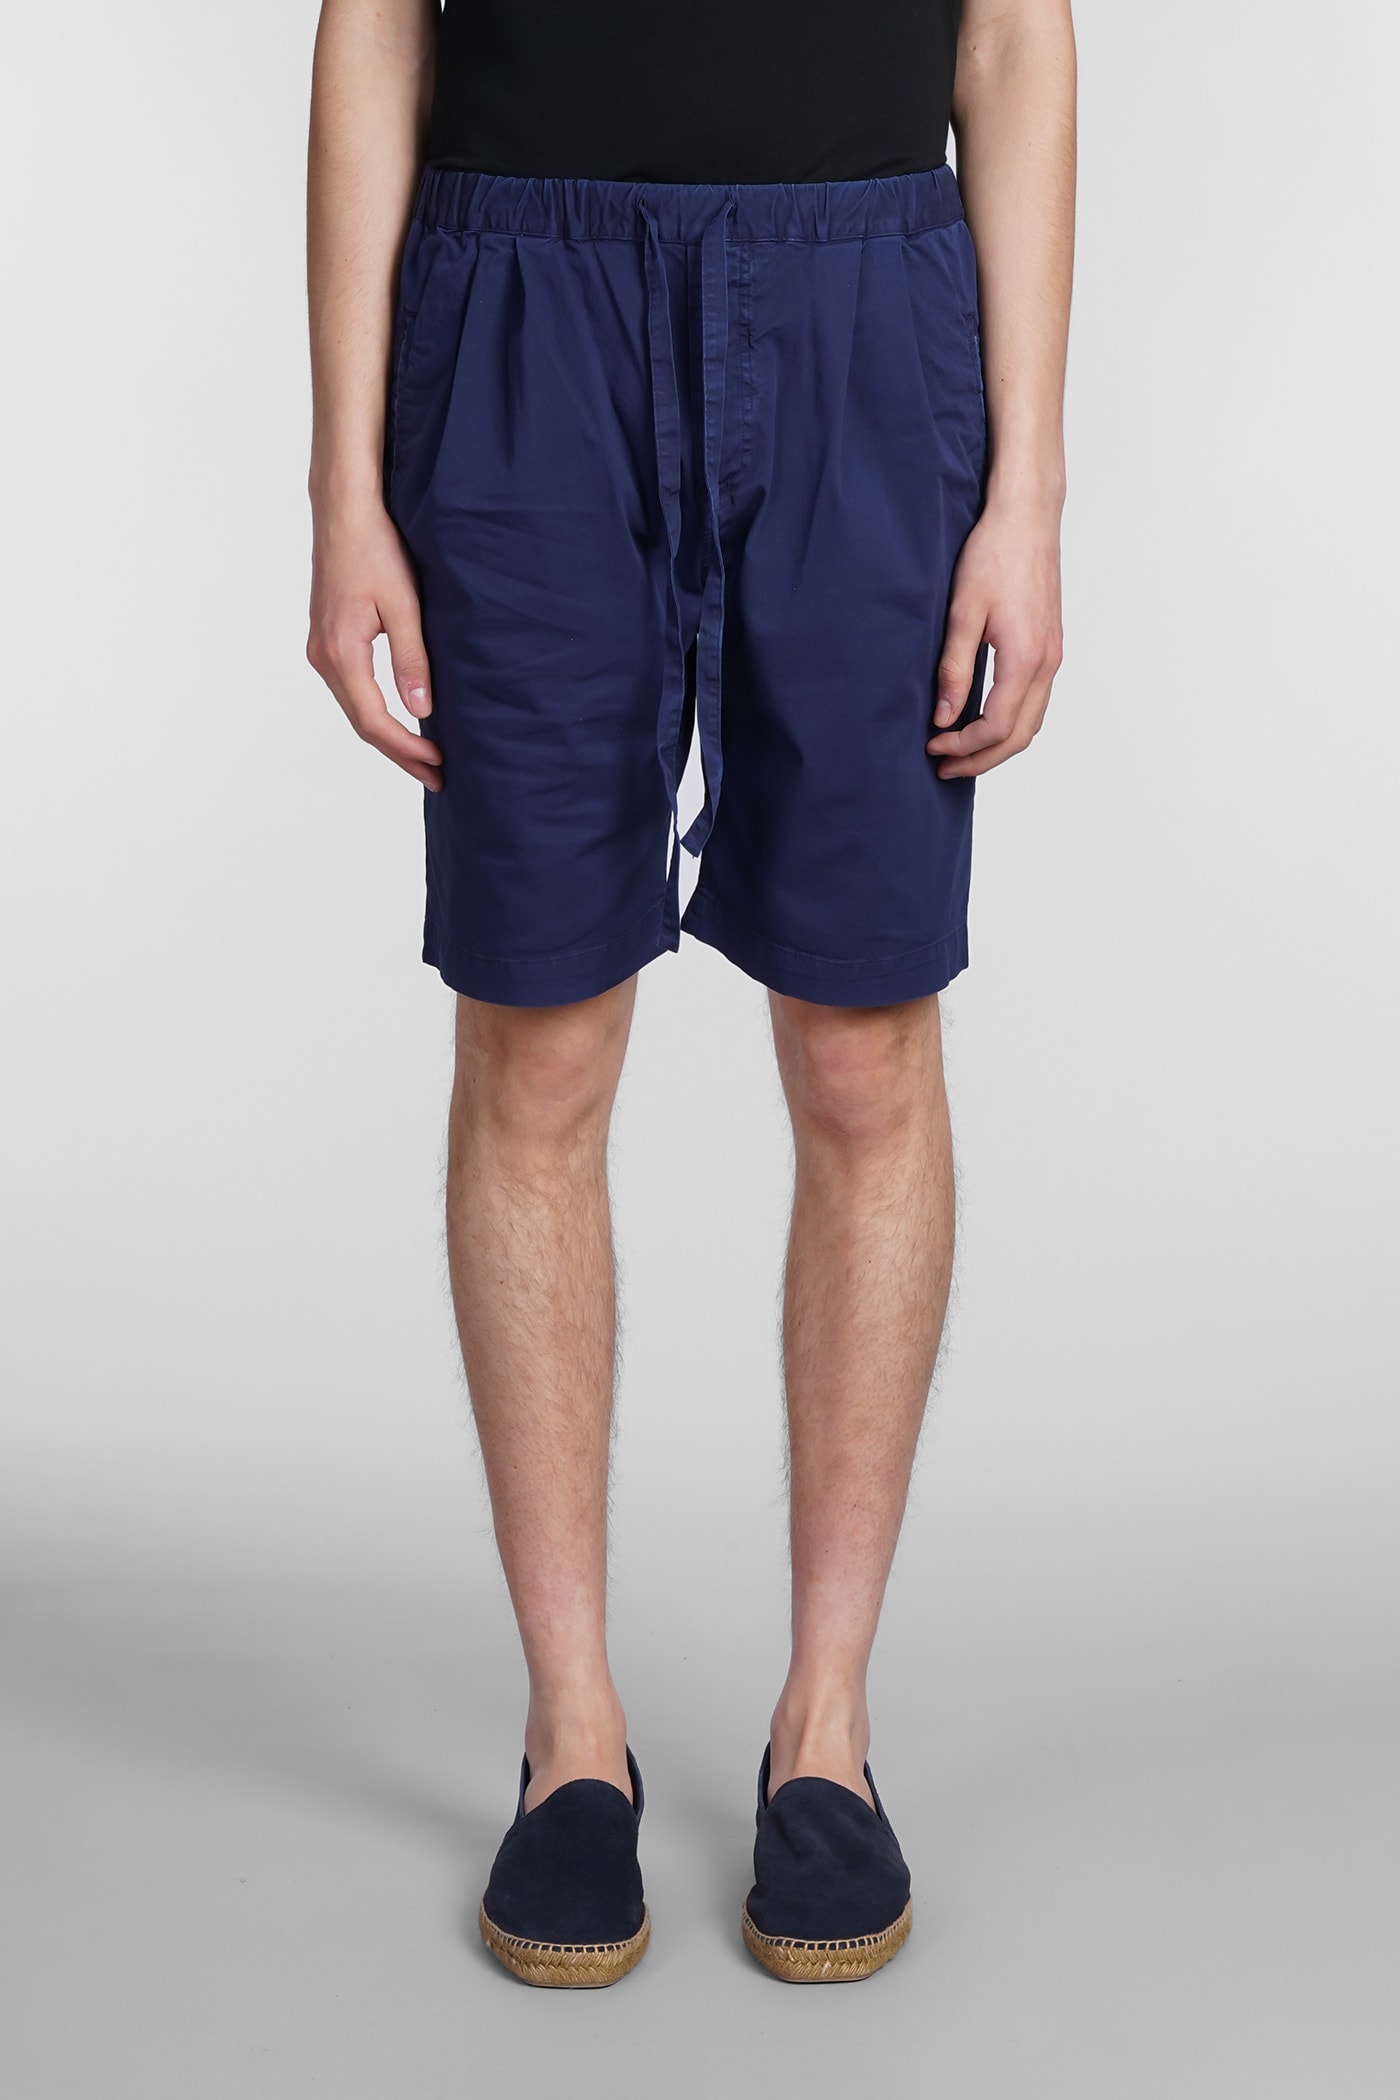 MASSIMO ALBA KEVIN SHORTS IN BLUE COTTON